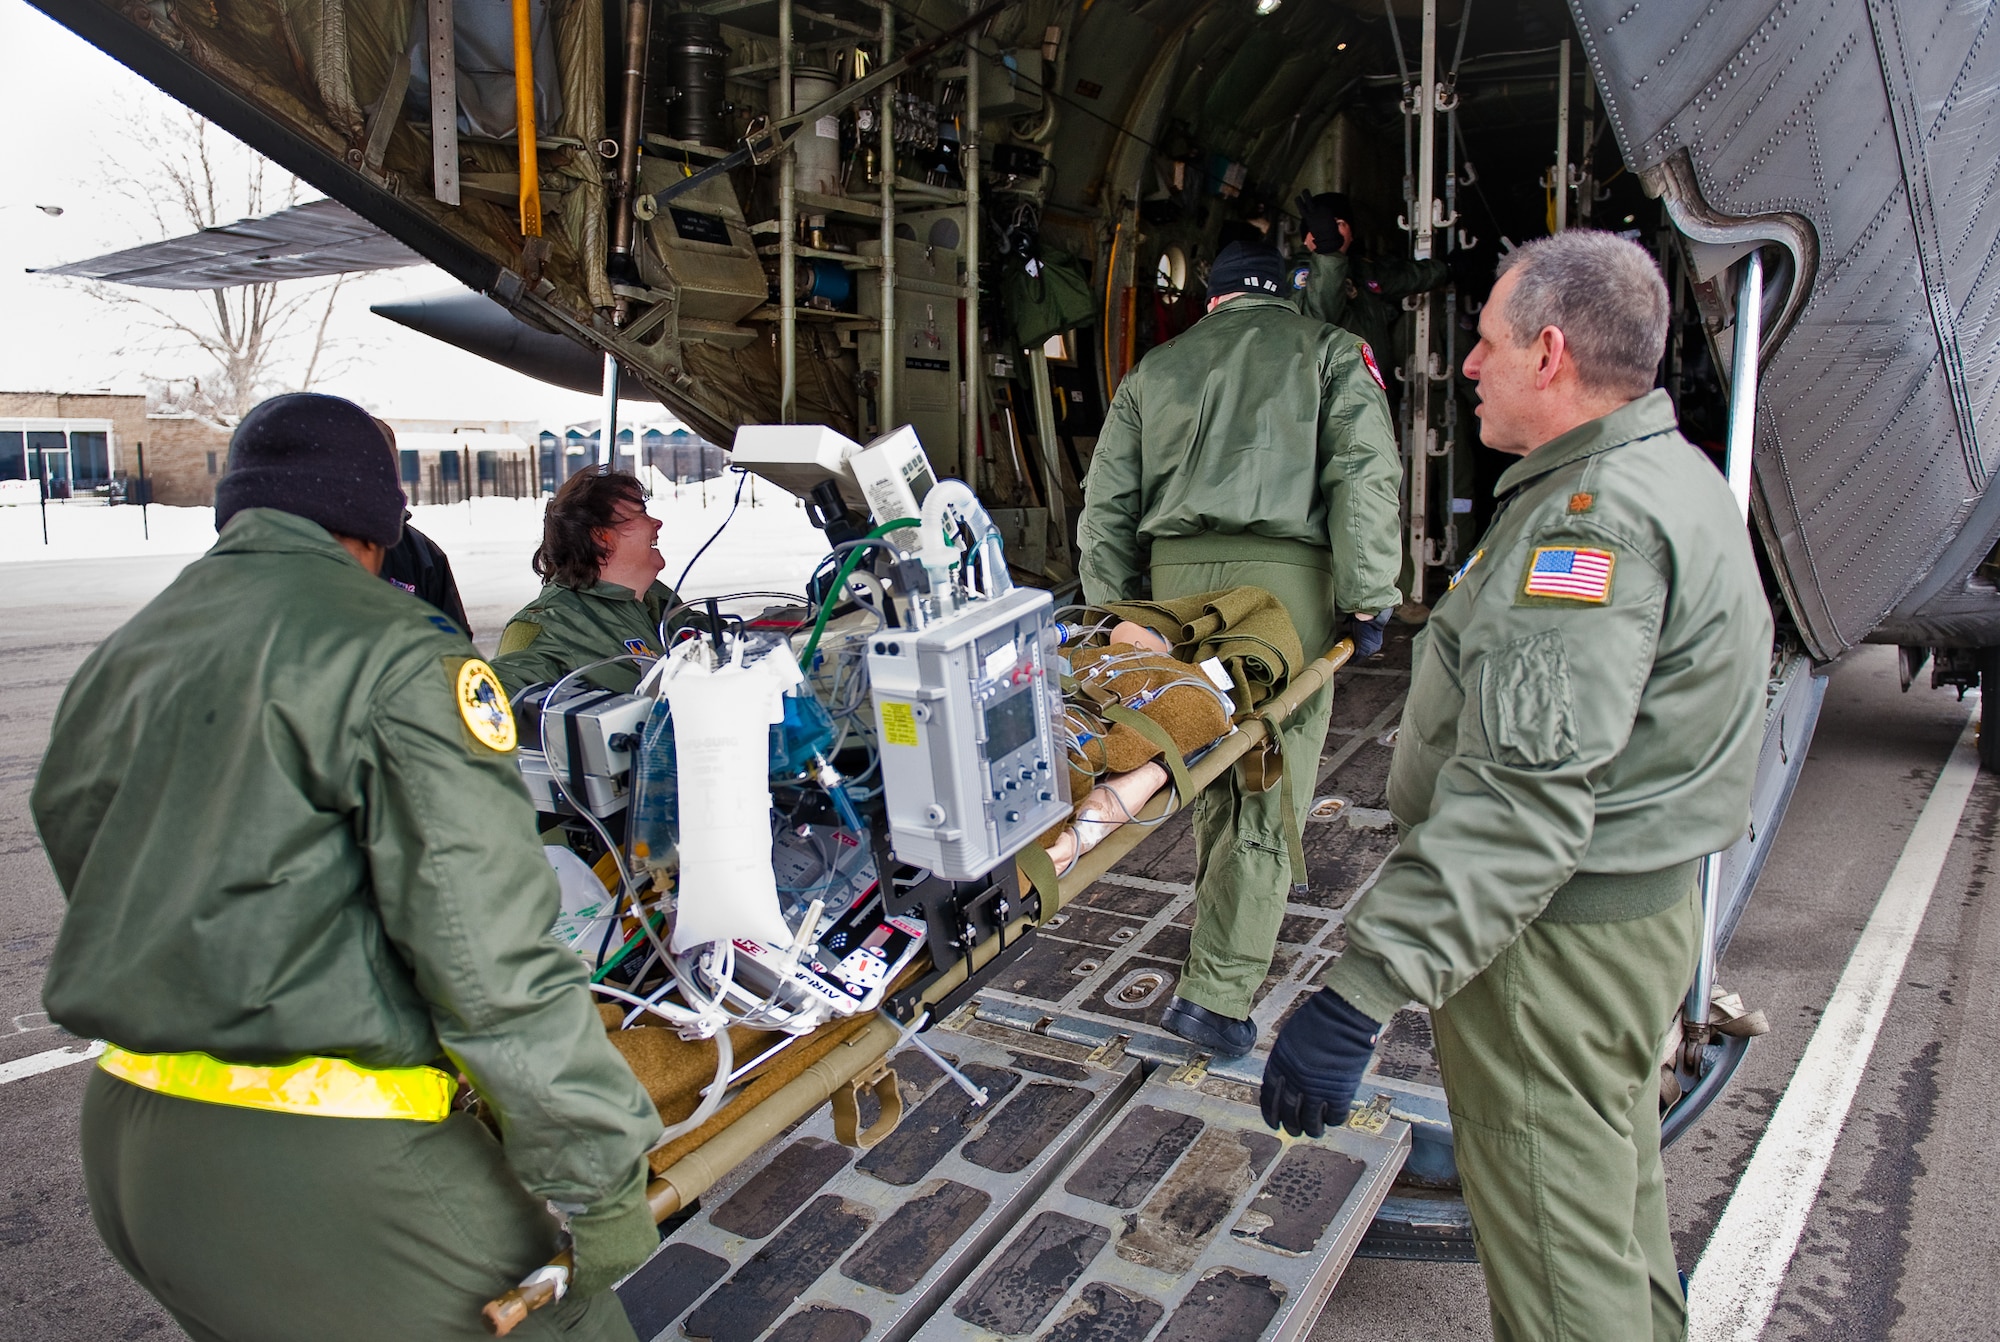 CINCINNATI, OHIO -- Students and instructors from the U.S. Air Force's CSTARS-Cincinnati course load simulated patients onto a Kentucky Air National Guard C-130 at Lunken Airport here Feb. 11, 2010. The two-week Critical Care Air Transport Team course is designed to provide medical personnel with total immersion in the care of severely injured patients. Ground training and simulated-flight training are conducted at the University of Cincinnati, one of four Air Force Centers for Sustainment of Trauma and Readiness Skills (CSTARS) nationwide, but the final day of instruction is provided during actual flight. The Kentucky Air Guard's 165th Airlift Squadron began providing C-130s to use as a CSTARS training platform in 2009. (U.S. Air Force by Maj. Dale Greer)